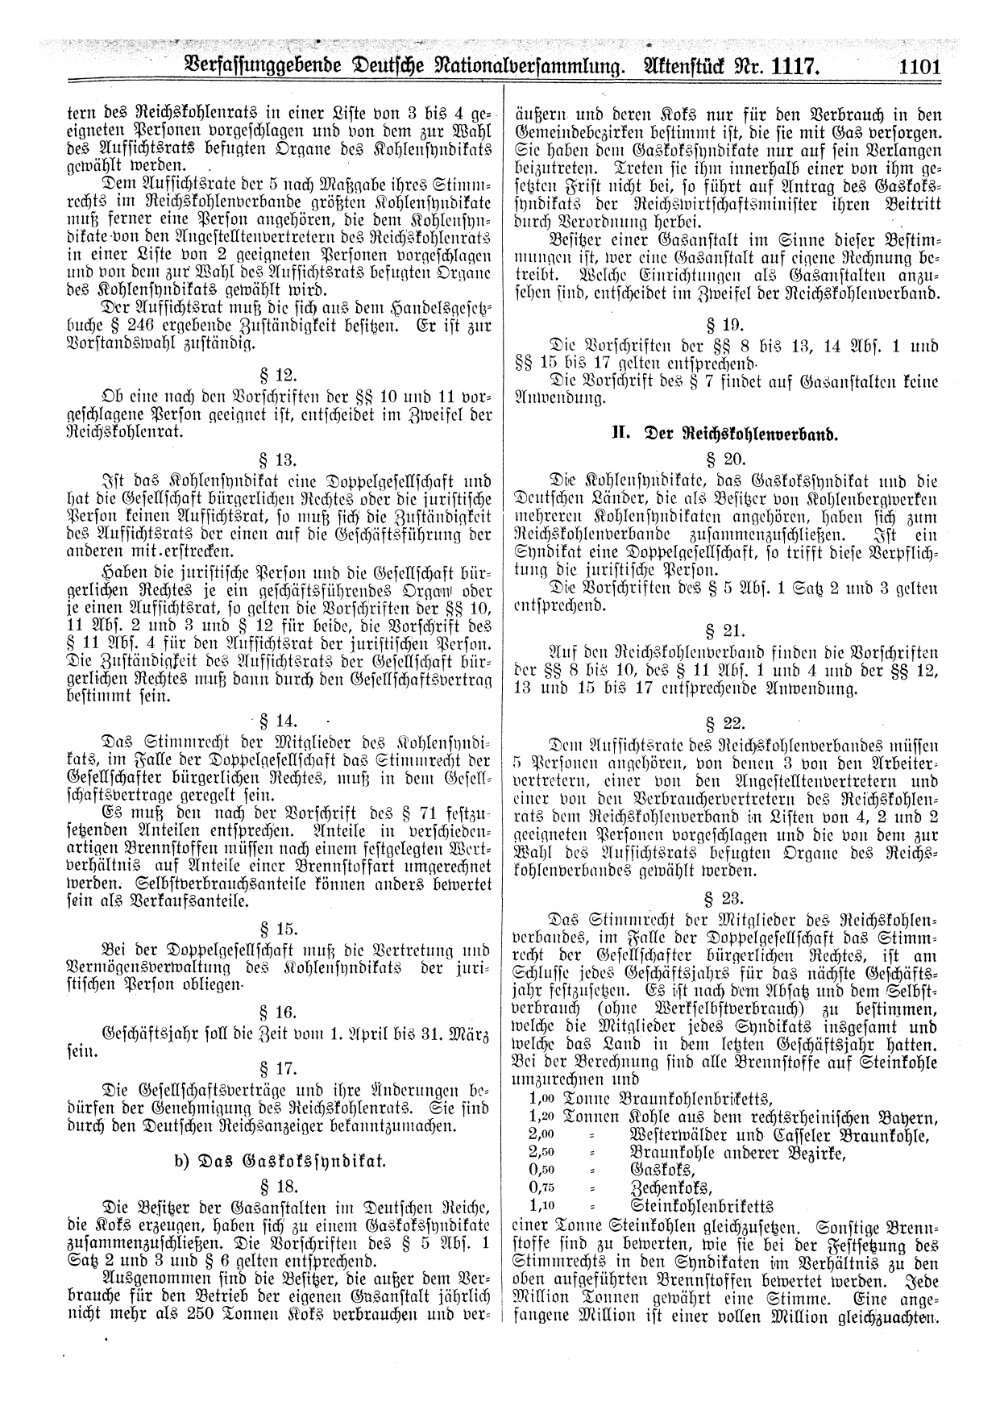 Scan of page 1101